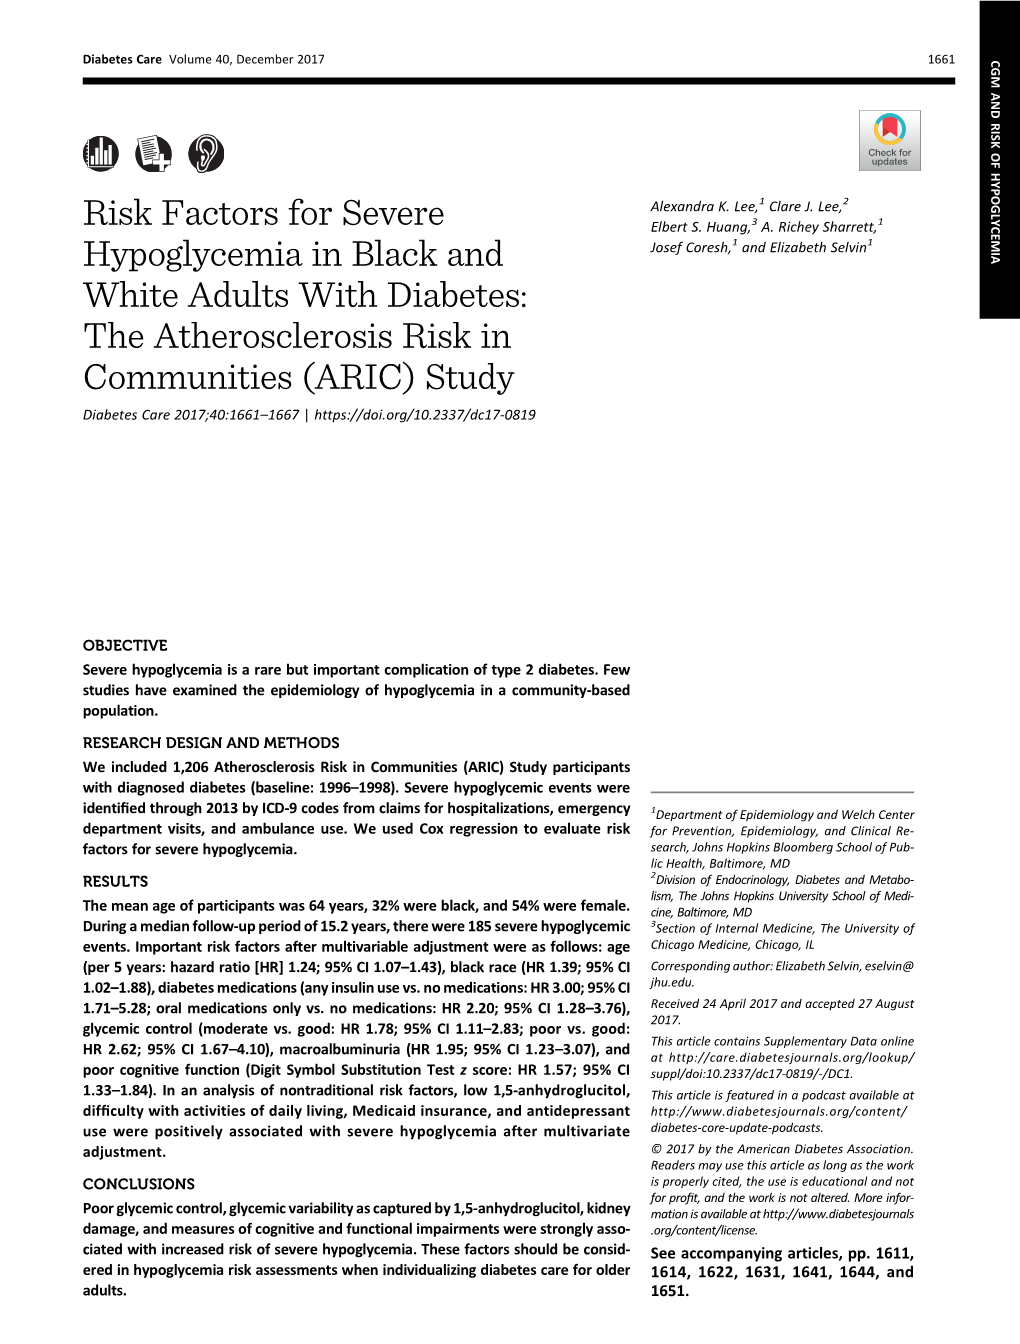 Risk Factors for Severe Hypoglycemia in Black and White Adults with Diabetes